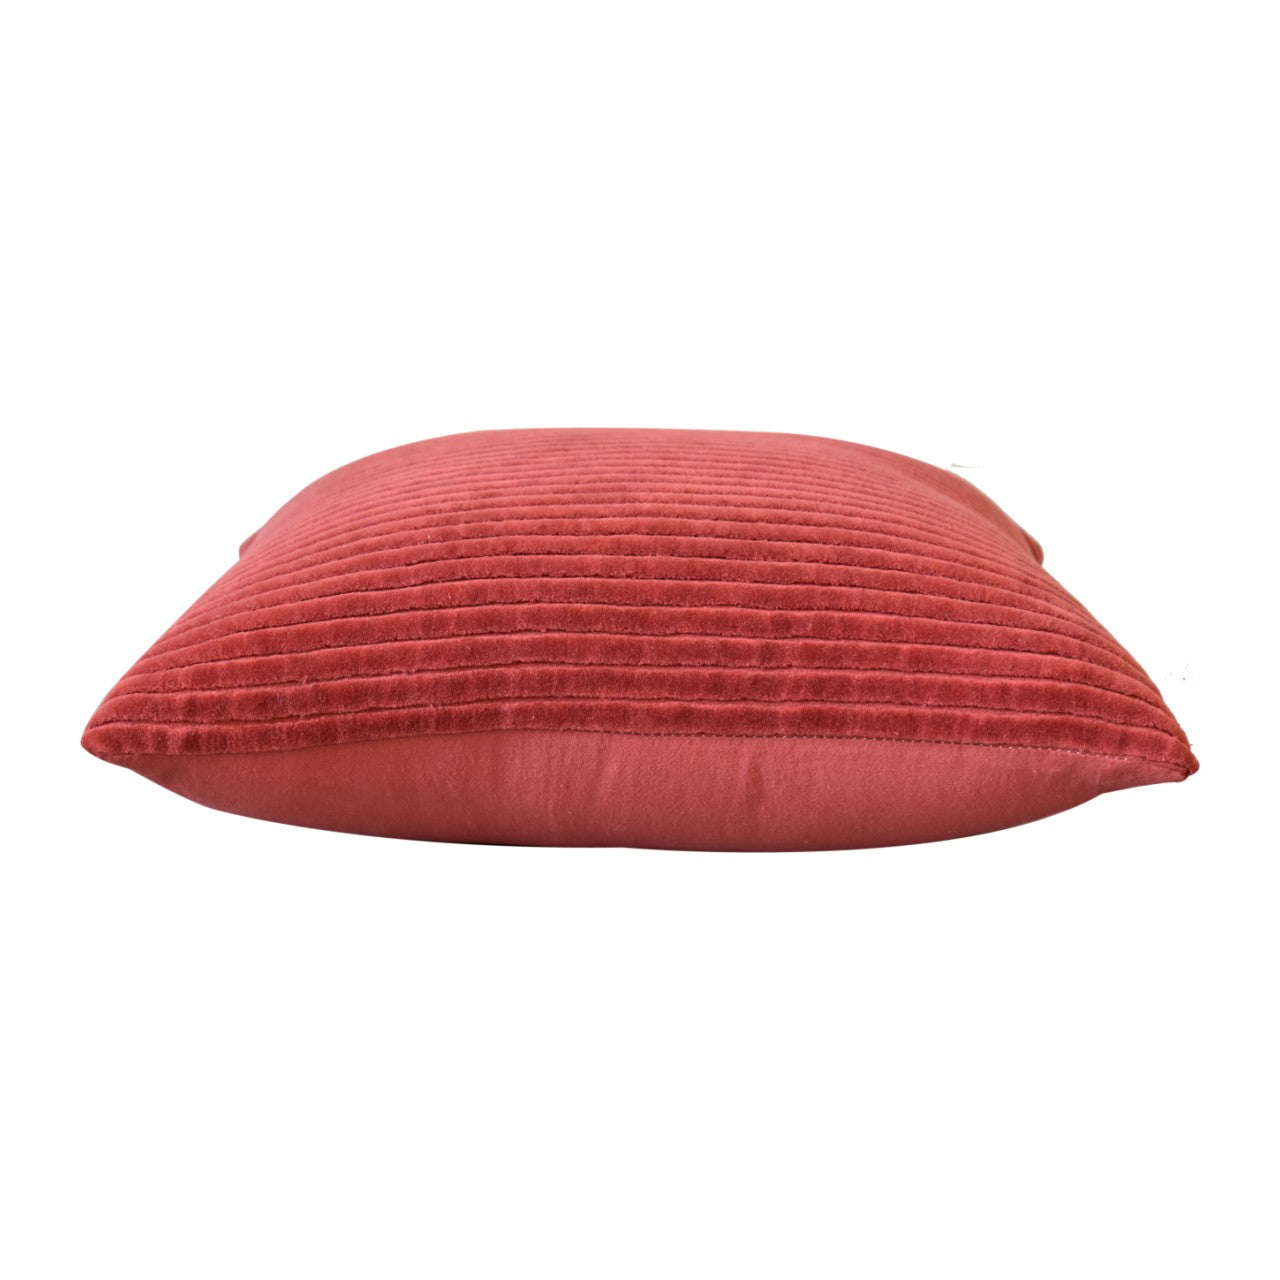 ribbed red cushion set of 2